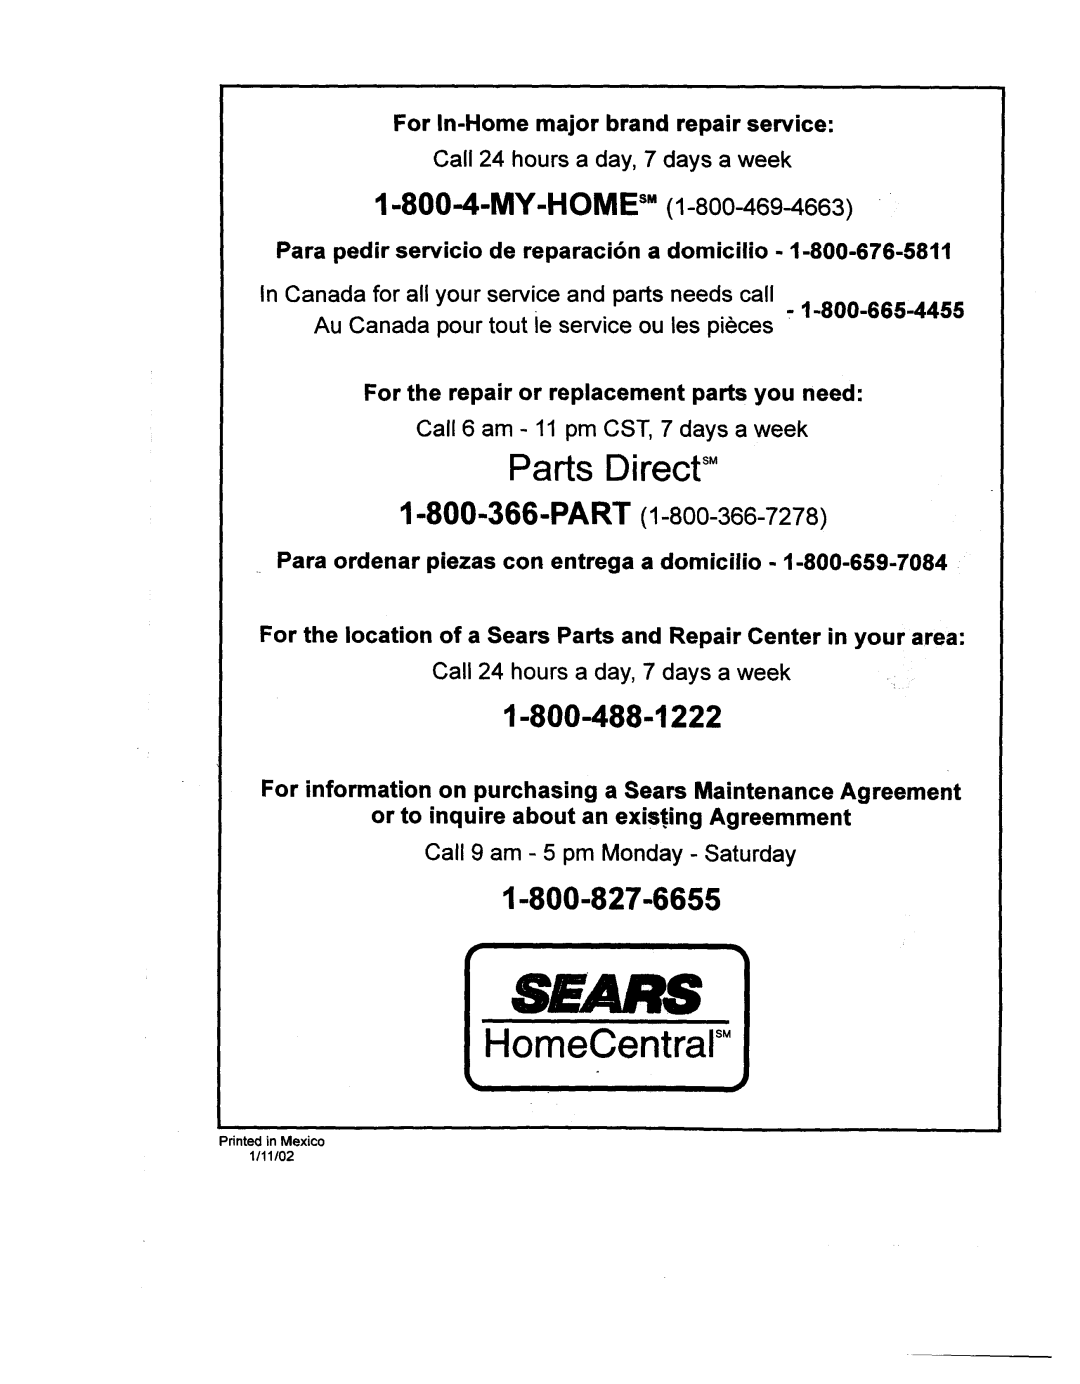 Kenmore 29701 warranty Parts Direct s, My-Home, 1-800-488-1222, 1-800-827-6655, Sears, HomeCentral, 1-800-665-4455 